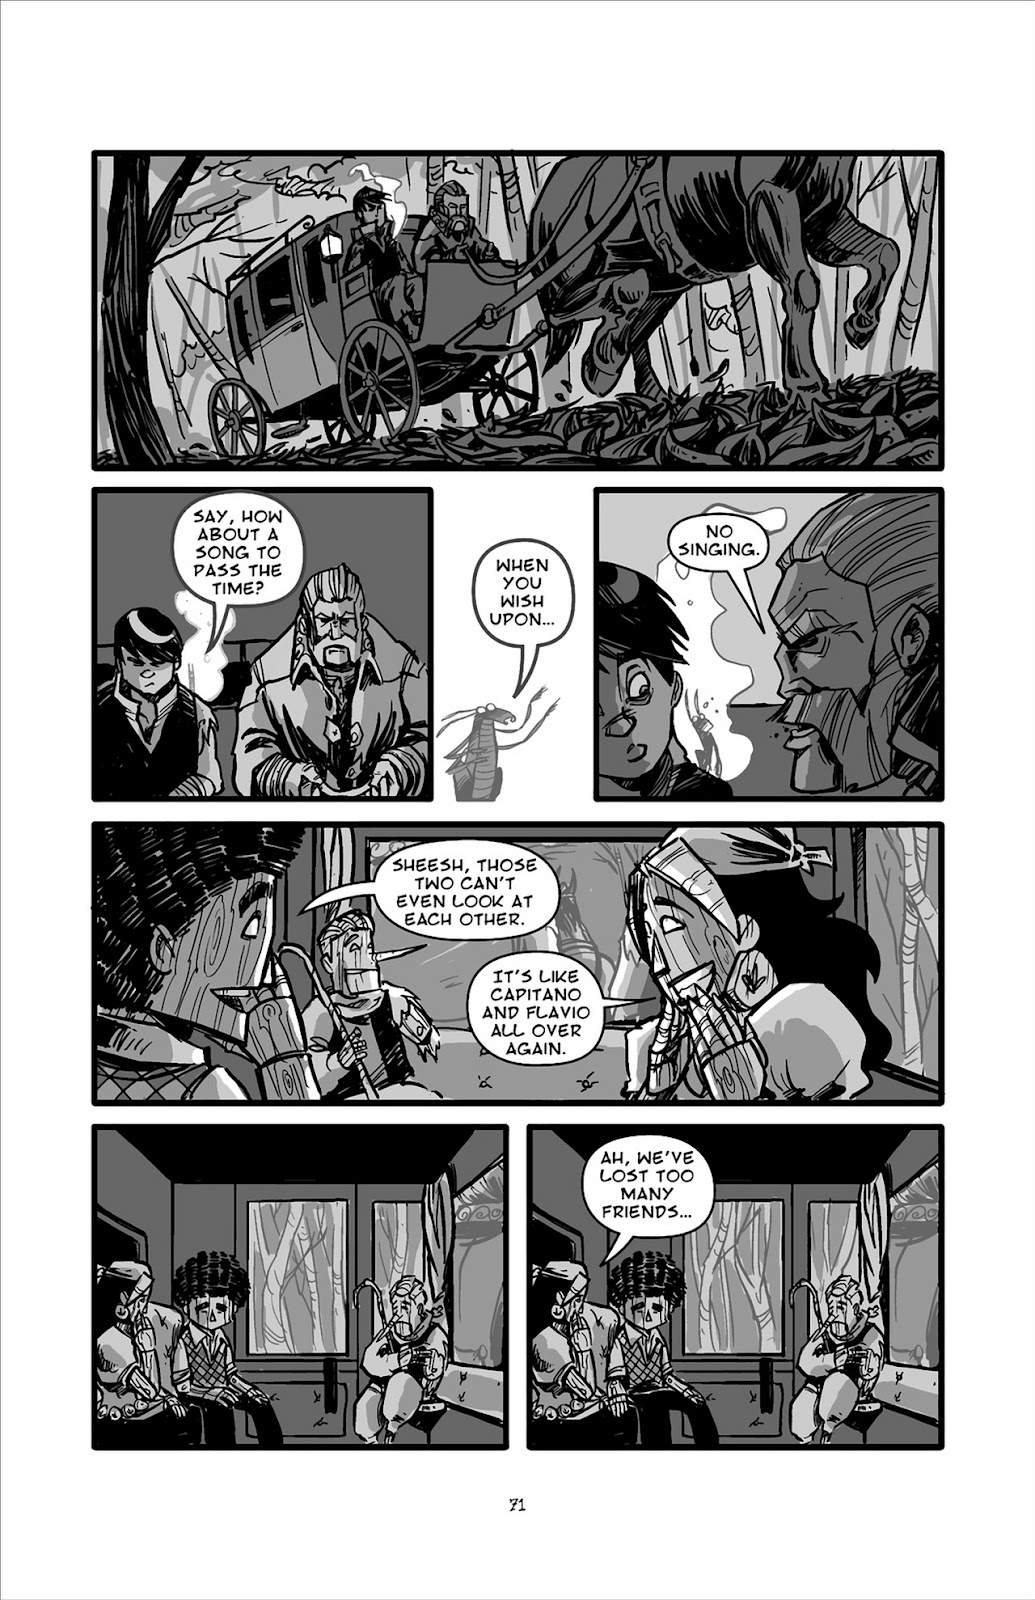 Pinocchio: Vampire Slayer - Of Wood and Blood issue 3 - Page 22